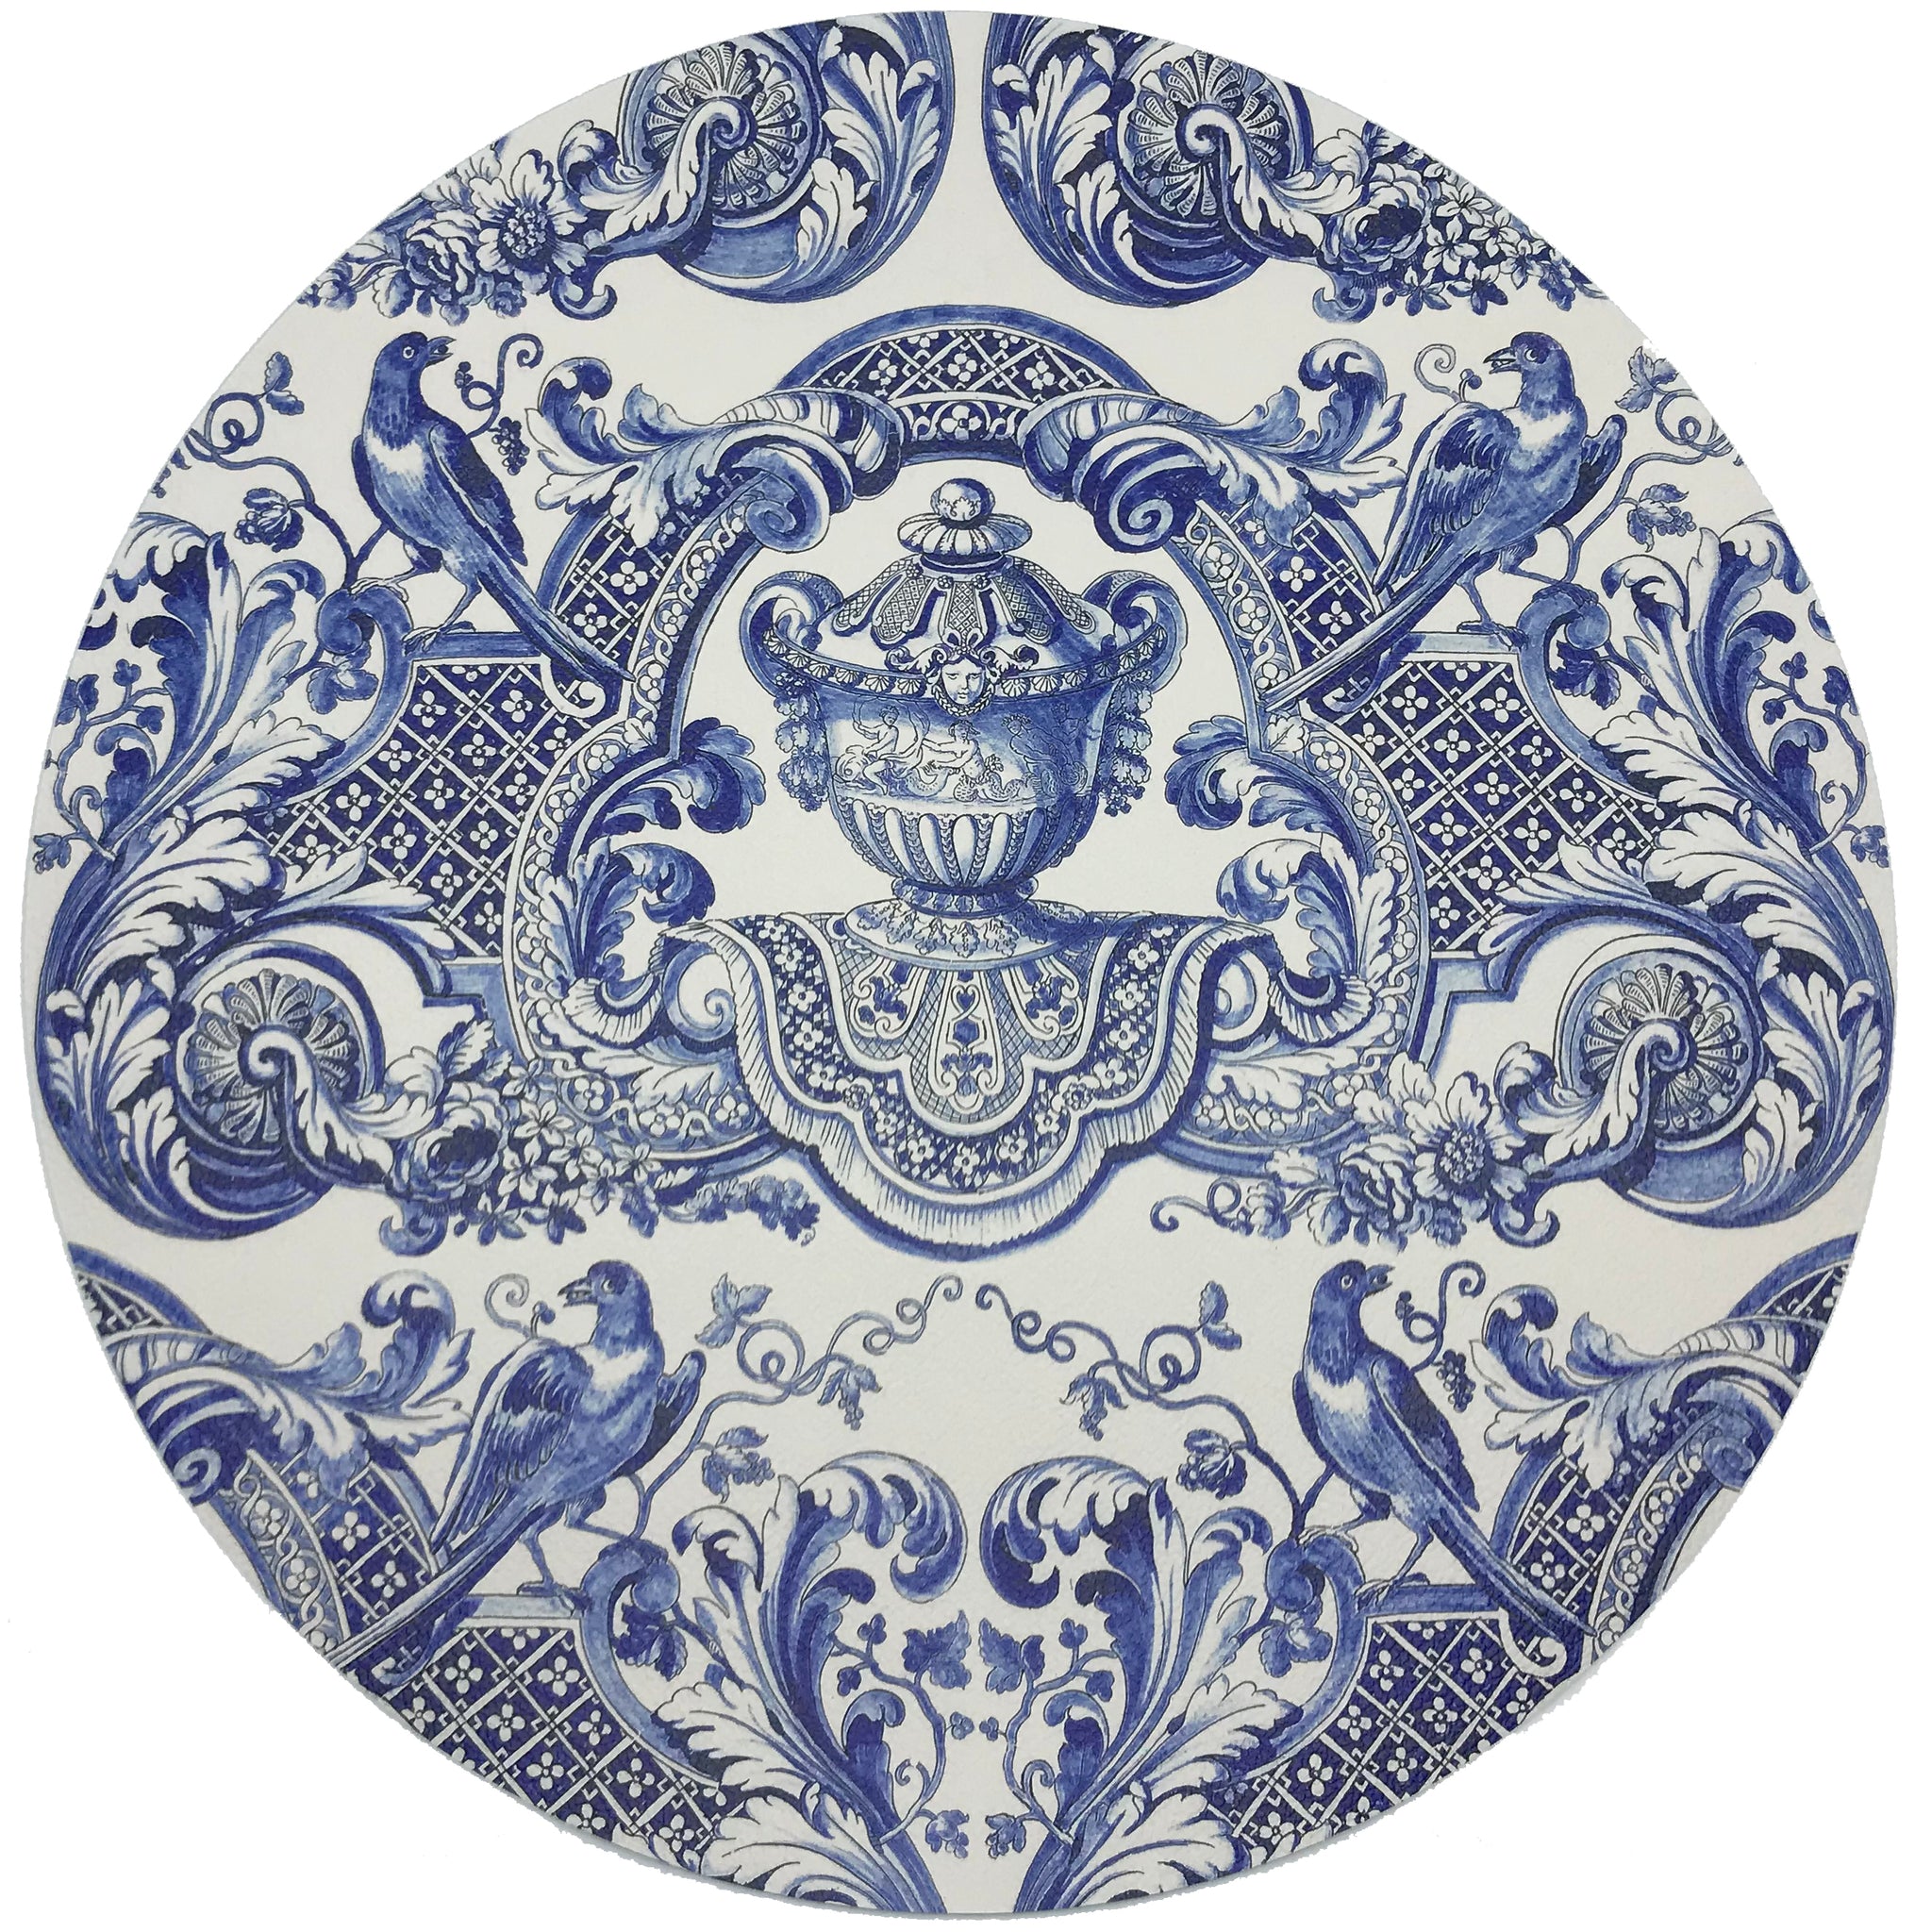 ROYAL DELFT WILLIAM AND MARY BLUE 16" ROUND PEBBLE PLACEMATS, SET OF 4 - nicolettemayer.com